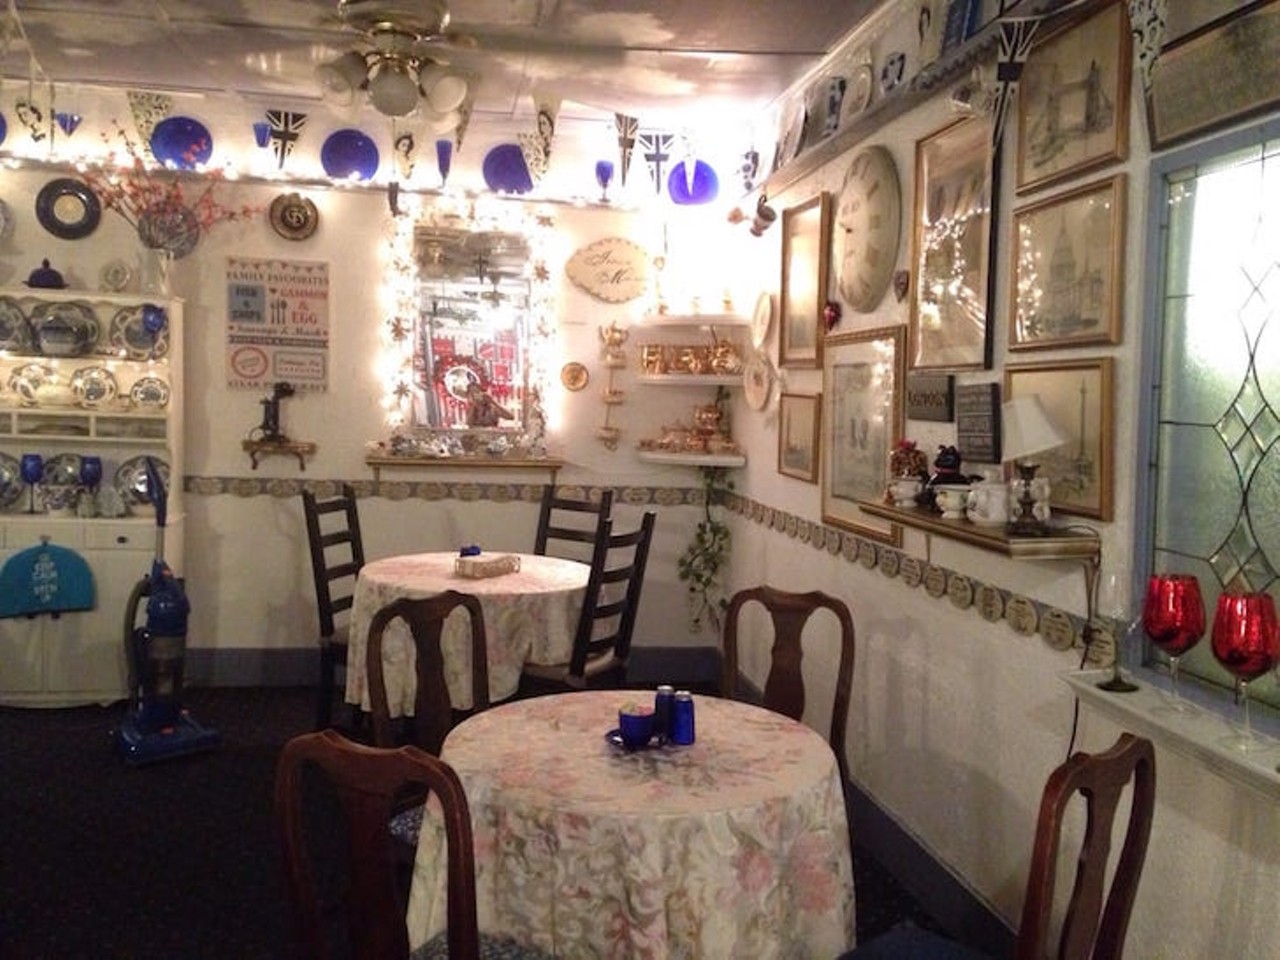 The Chattaway  
358 22nd Ave., St. Petersburg, 727-823-1594
Located in St. Petersburg, this is a traditional British eatery complete with a special tea room for afternoon high tea, but reservations must be made in advance. 
Photo via Yelp/Melissa Z.